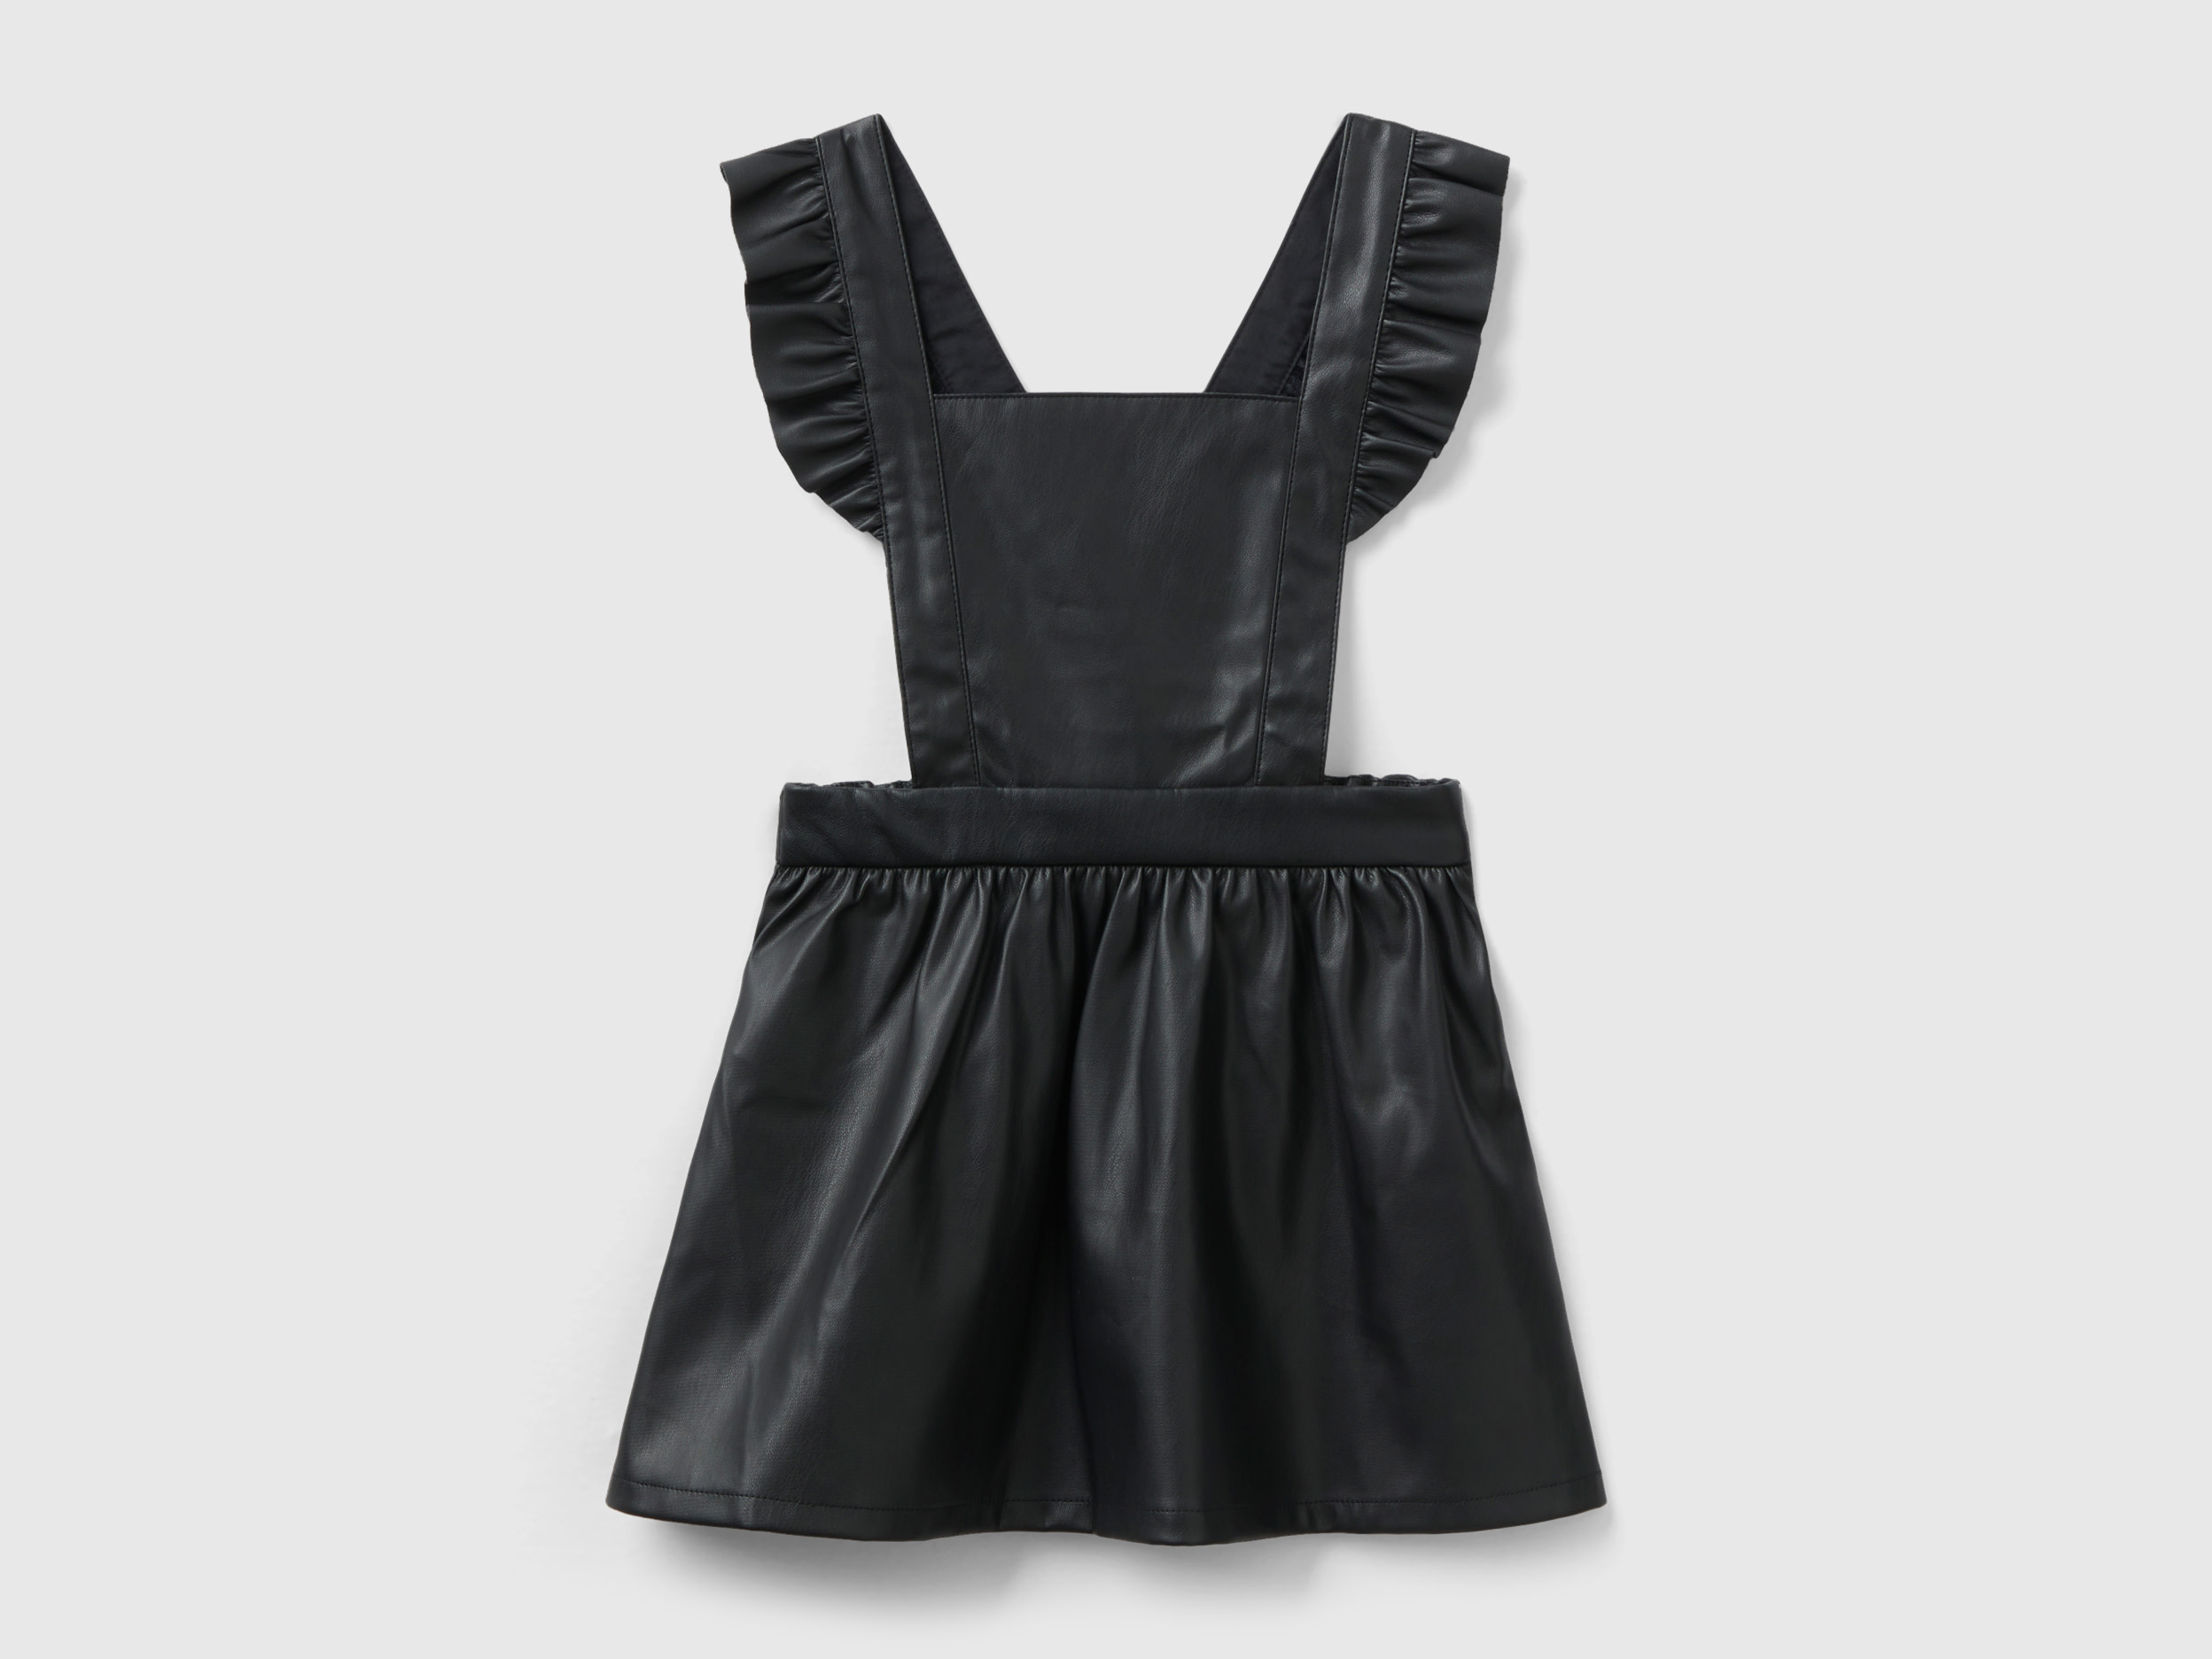 Benetton, Overall Skirt In Imitation Leather Fabric, size 5-6, Black, Kids